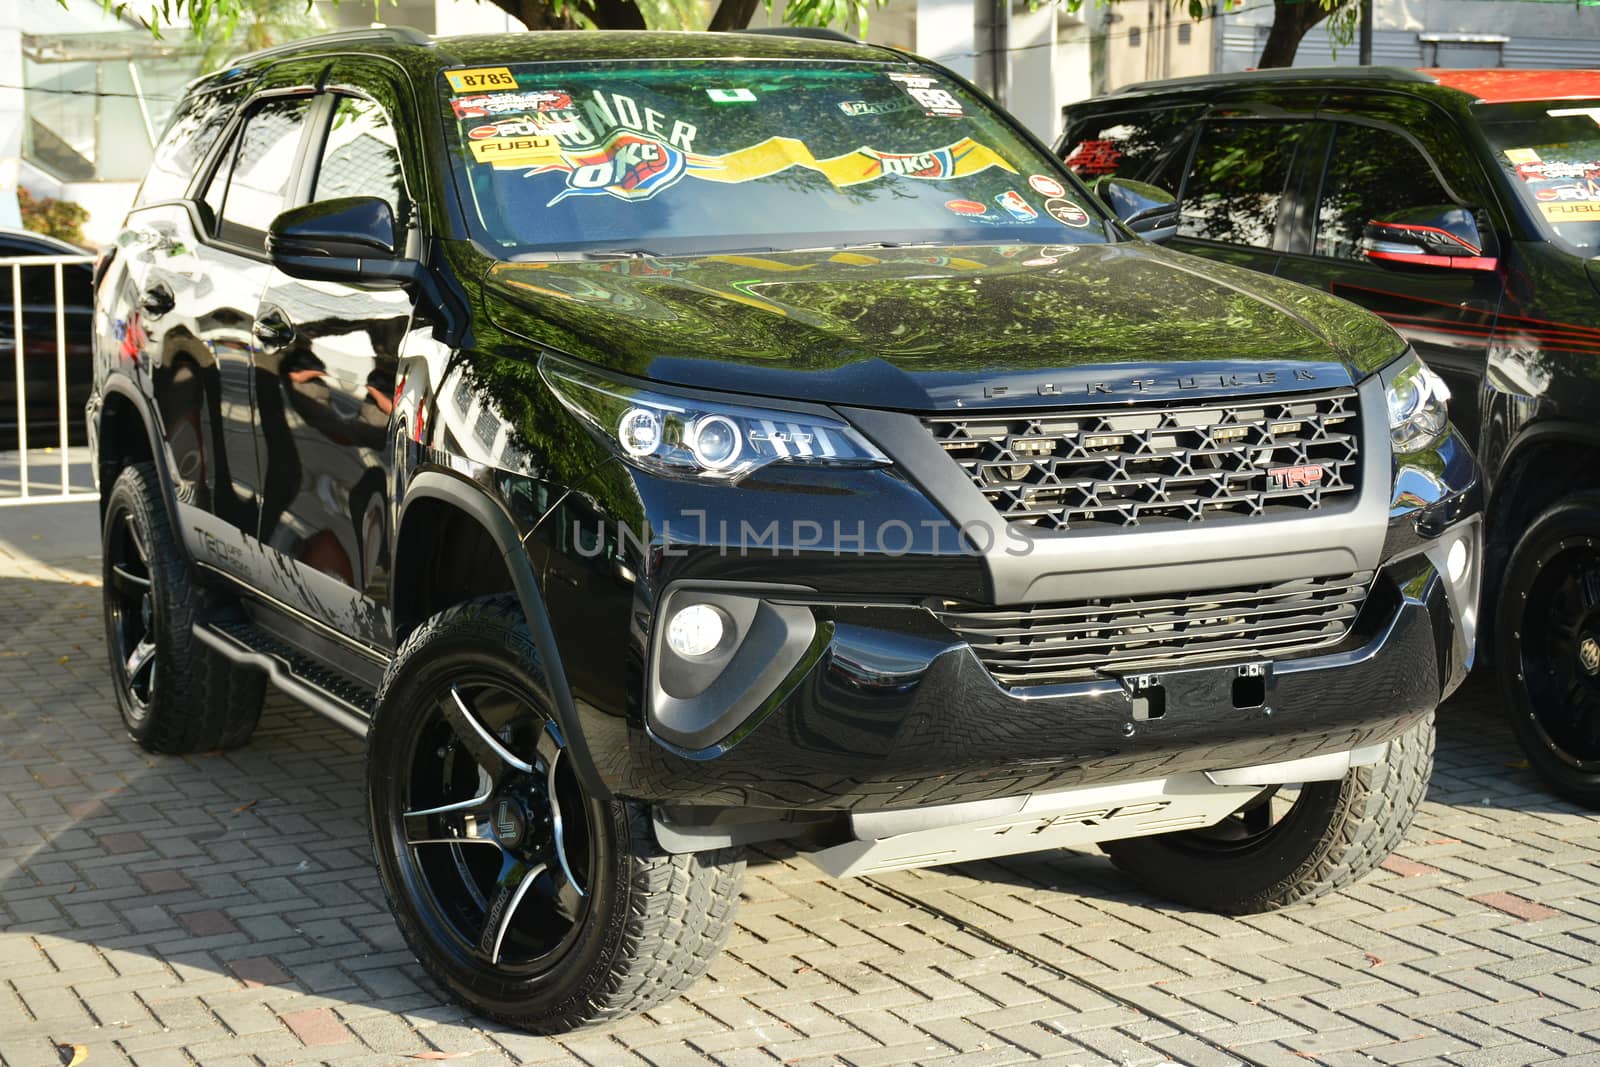 PASAY, PH - DEC 8 - Toyota fortuner suv at Bumper to Bumper car show on December 8, 2018 in Pasay, Philippines.